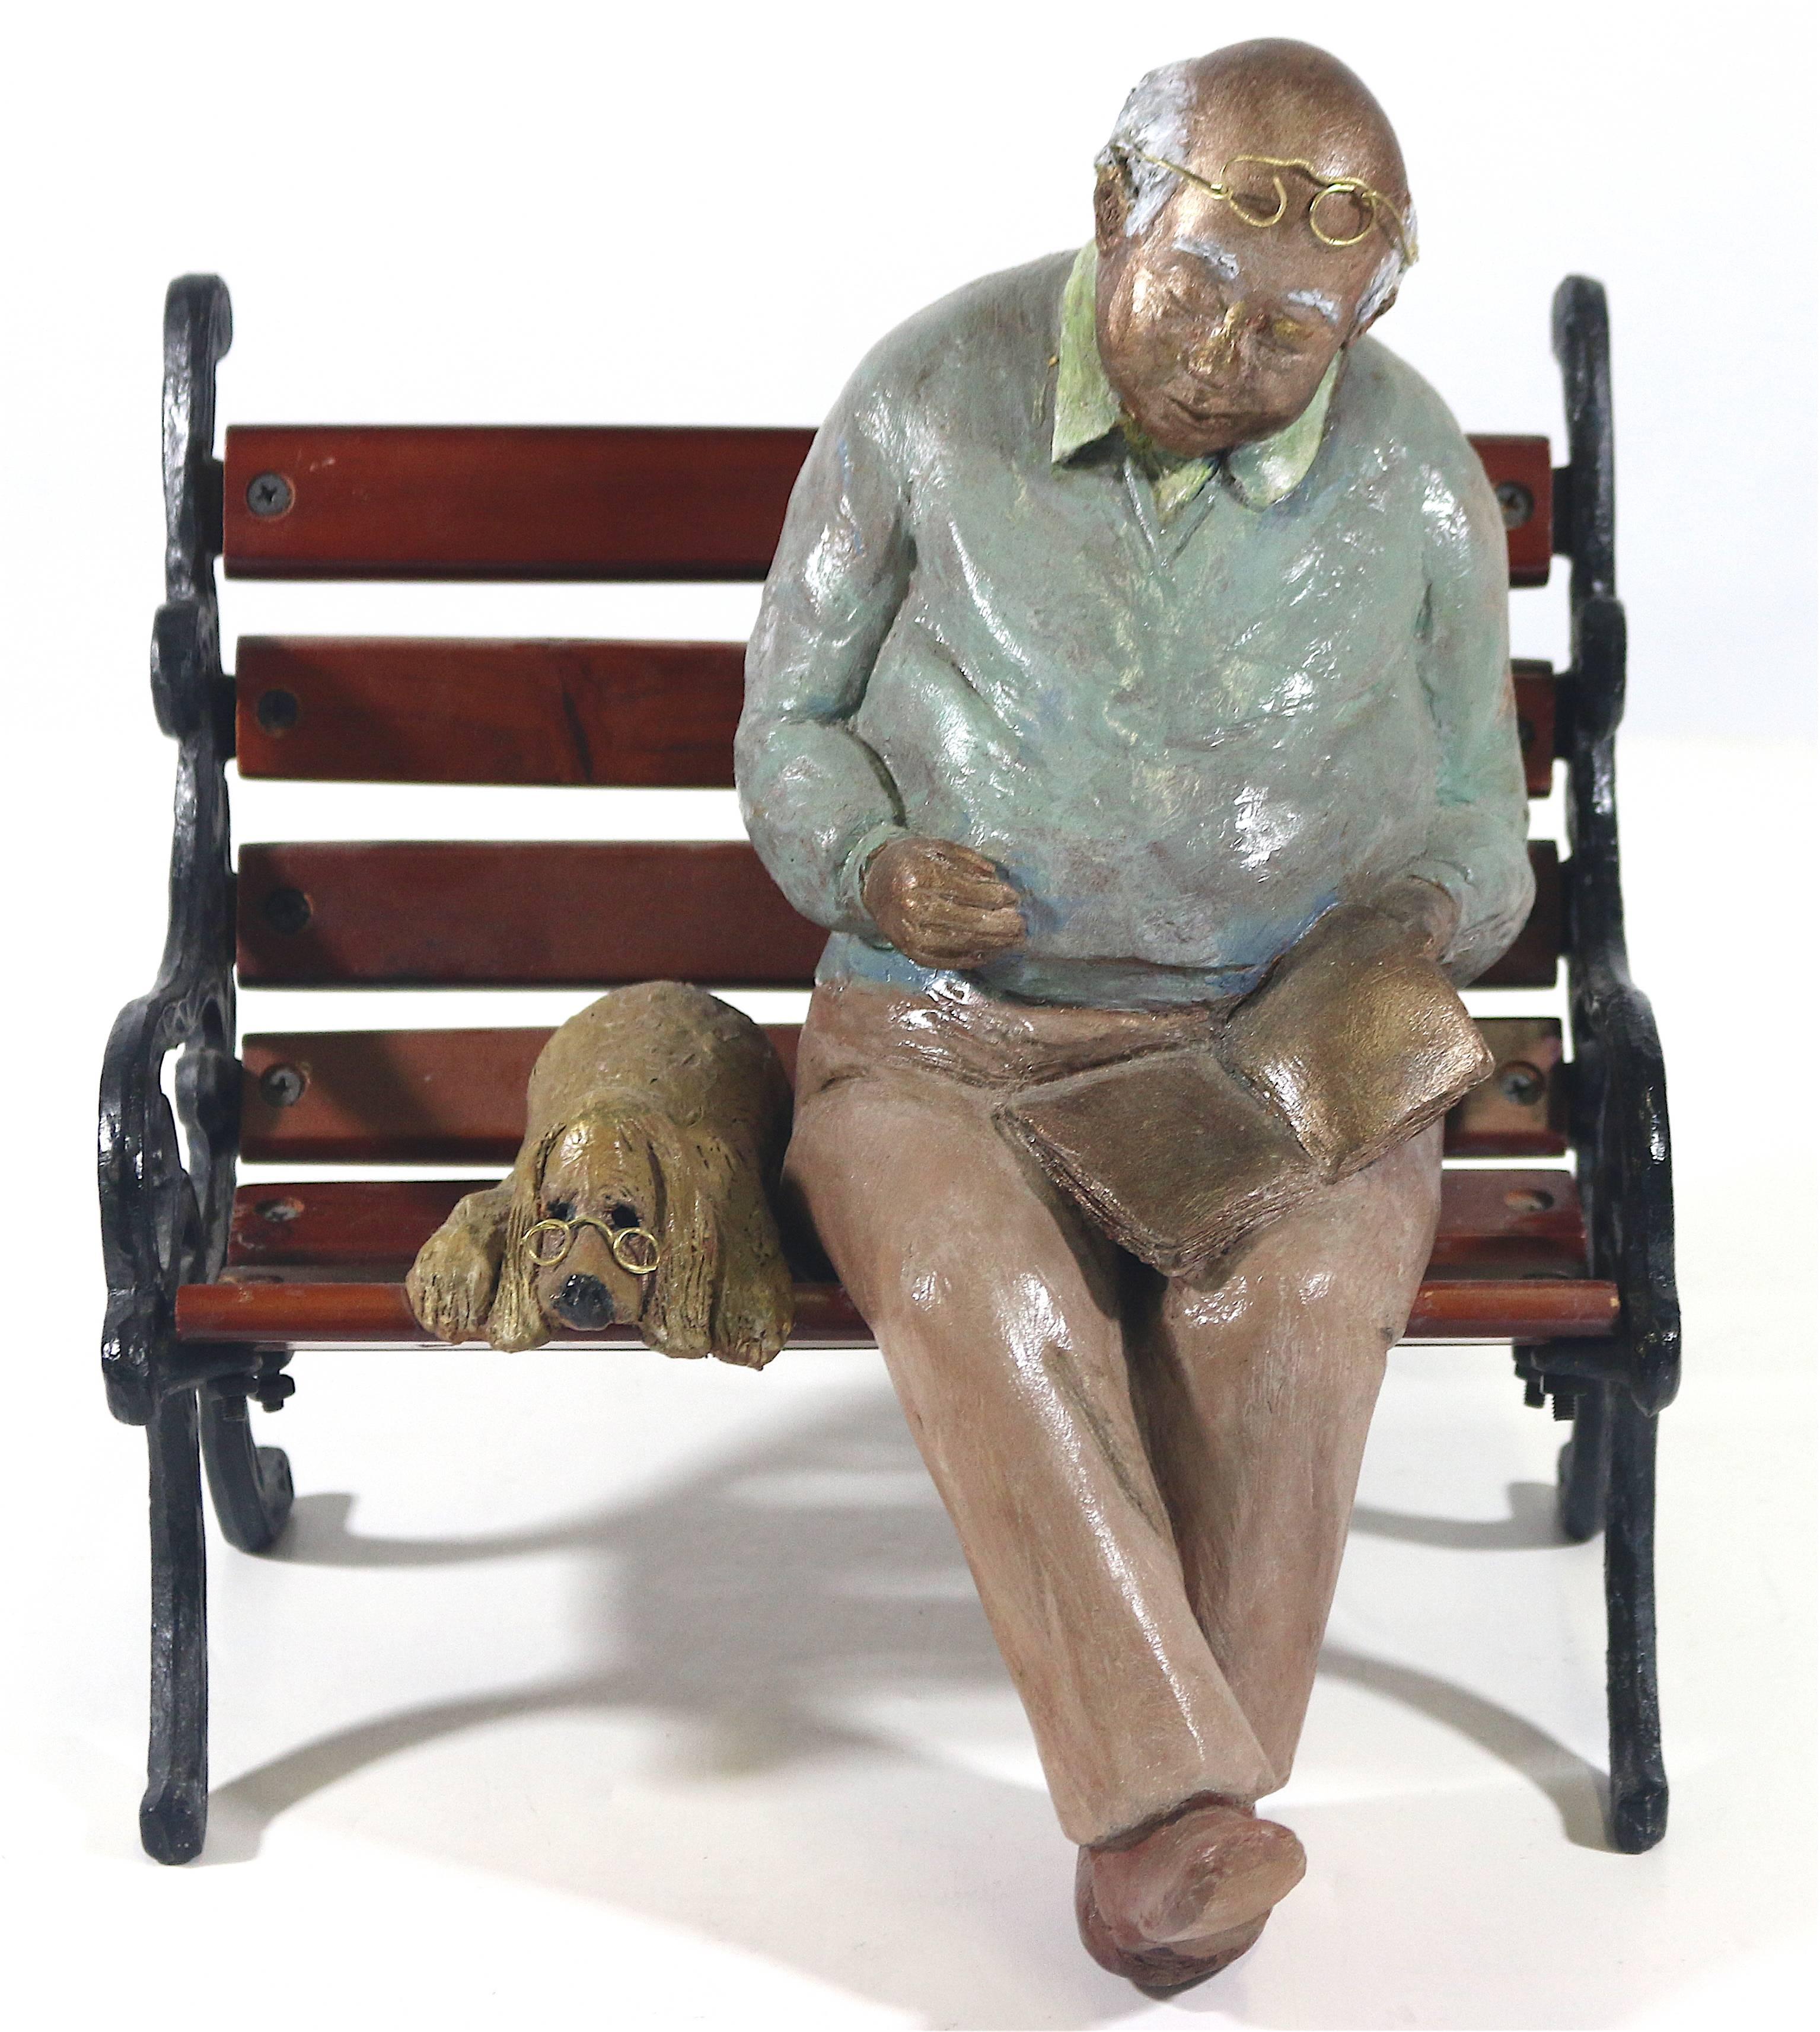 Man and his dog, what is a more poignant scene!
A 20th century bit of whimsy in a charming mixed media sculpture bronze, wood, metal an Inspired image of a man of experience with his faithful wise dog and his favorite book taking a respite on a